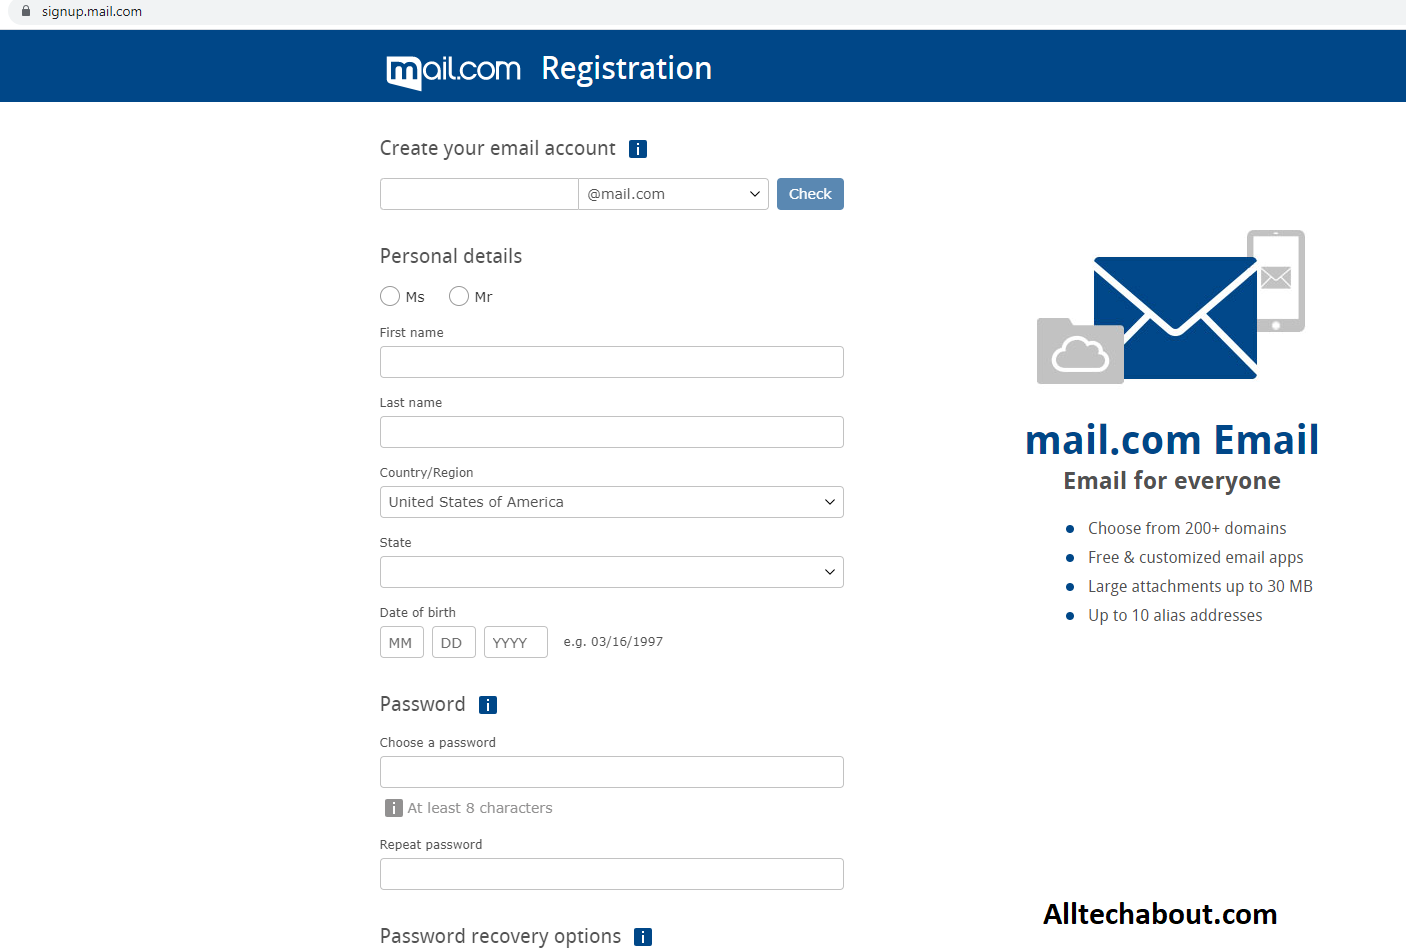 Create an email account